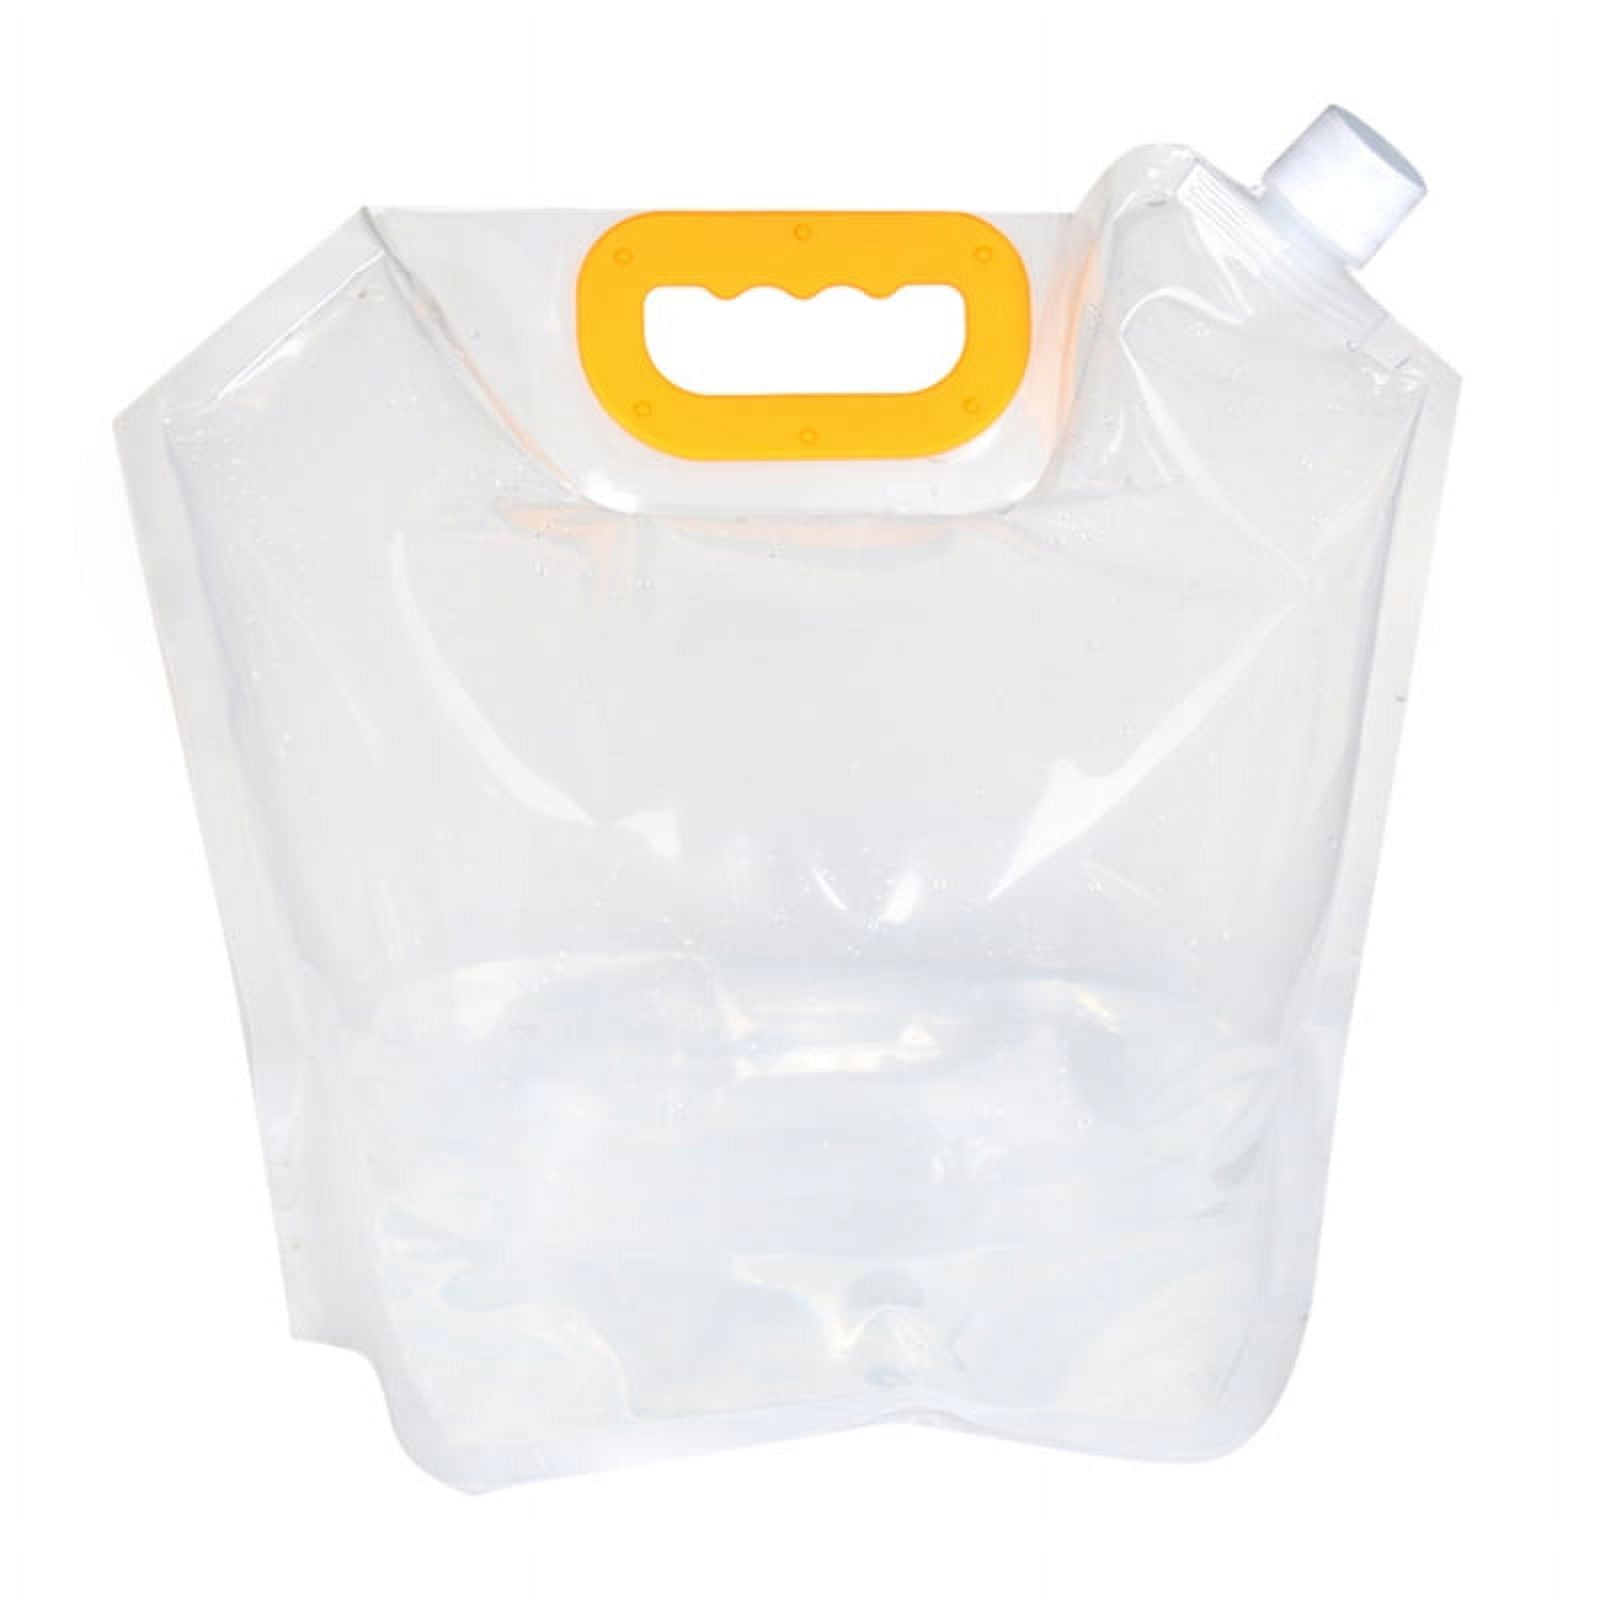 LINASHI 1 Set 350ML/500ML/200ML/100ML/1000ML Plastic Liquor Pouches  Drinking Flasks Reusable Liquid Hide Bags with Silicone Funnel Included 